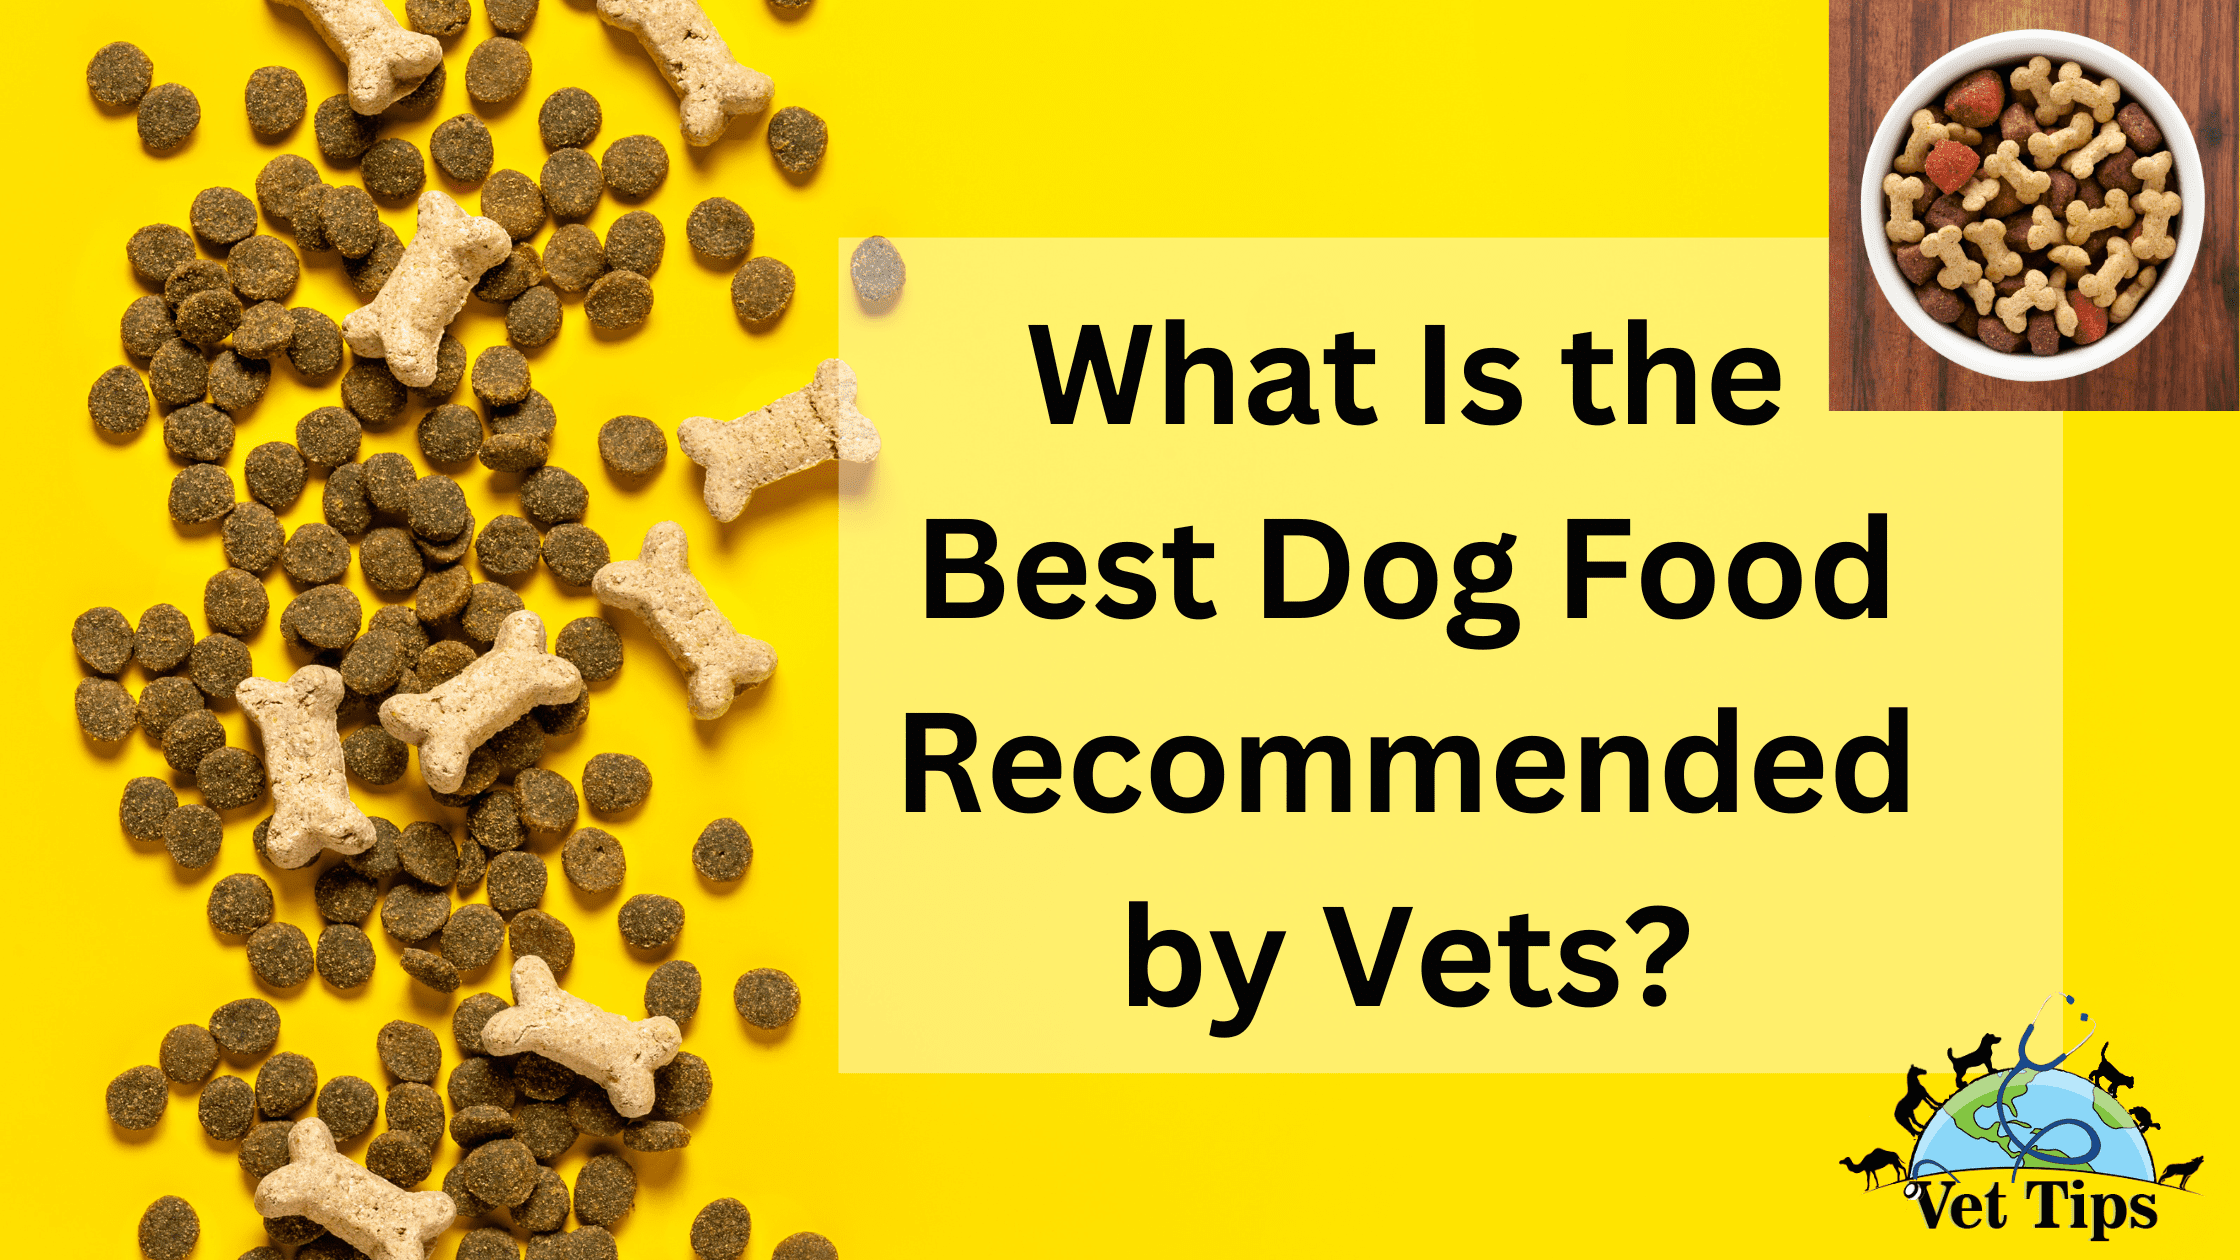 What Is the Best Dog Food Recommended by Vets?